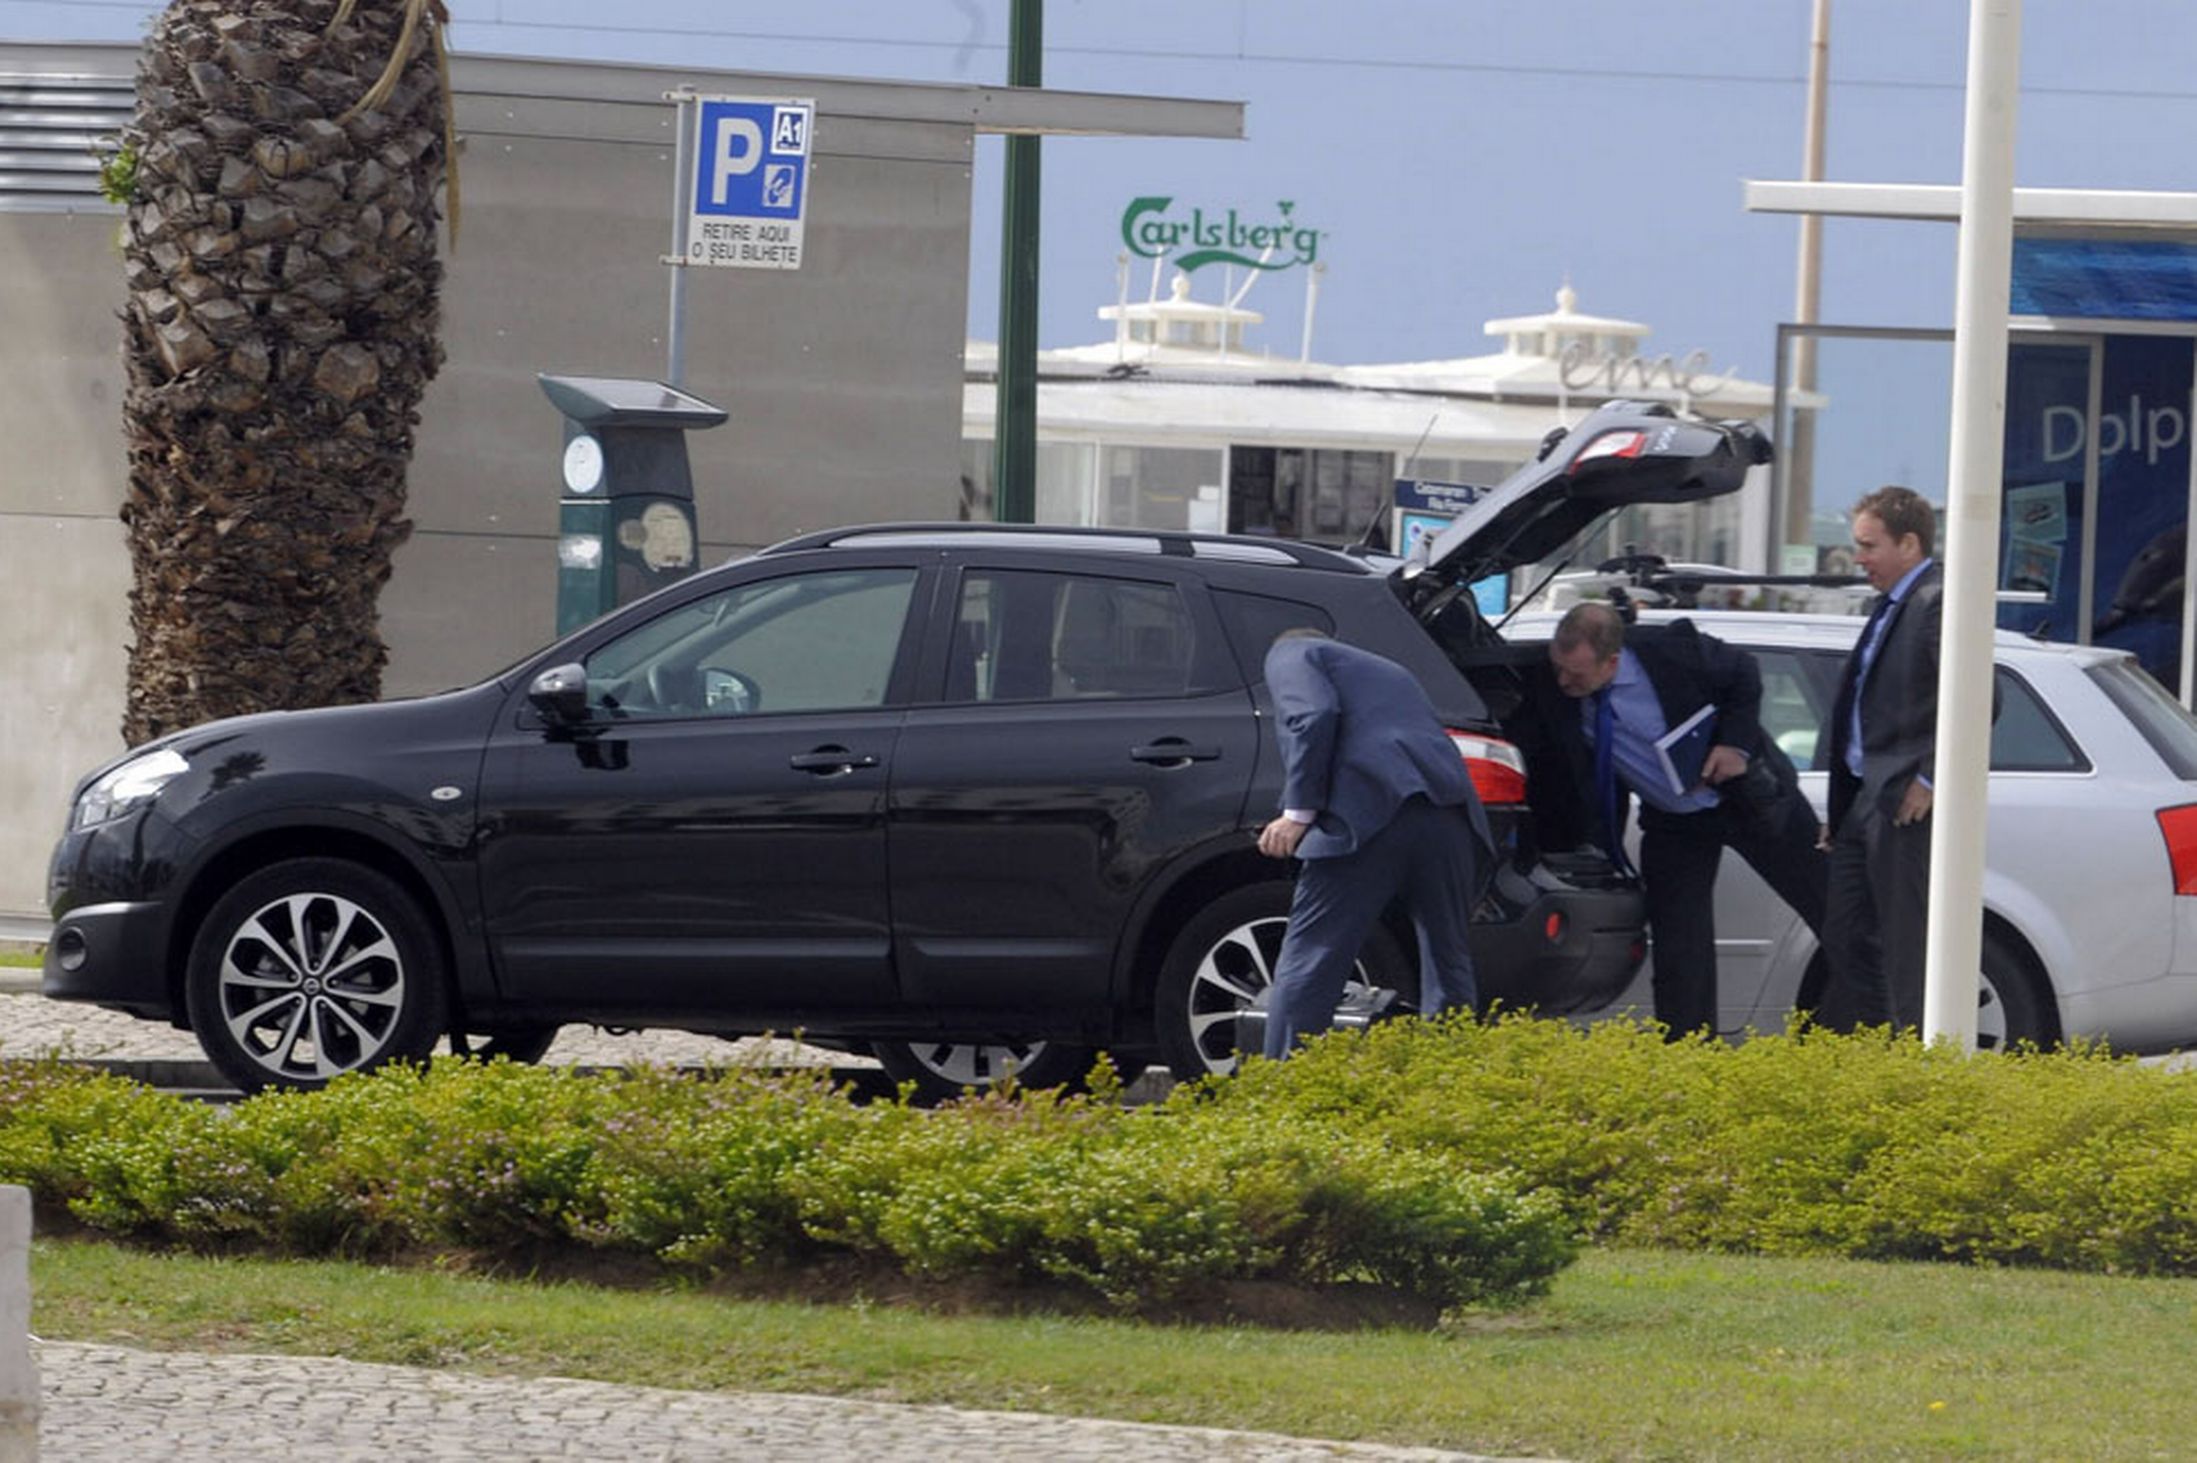 They headed a meeting with portuguese investigation police relating to the Madeline McCann case